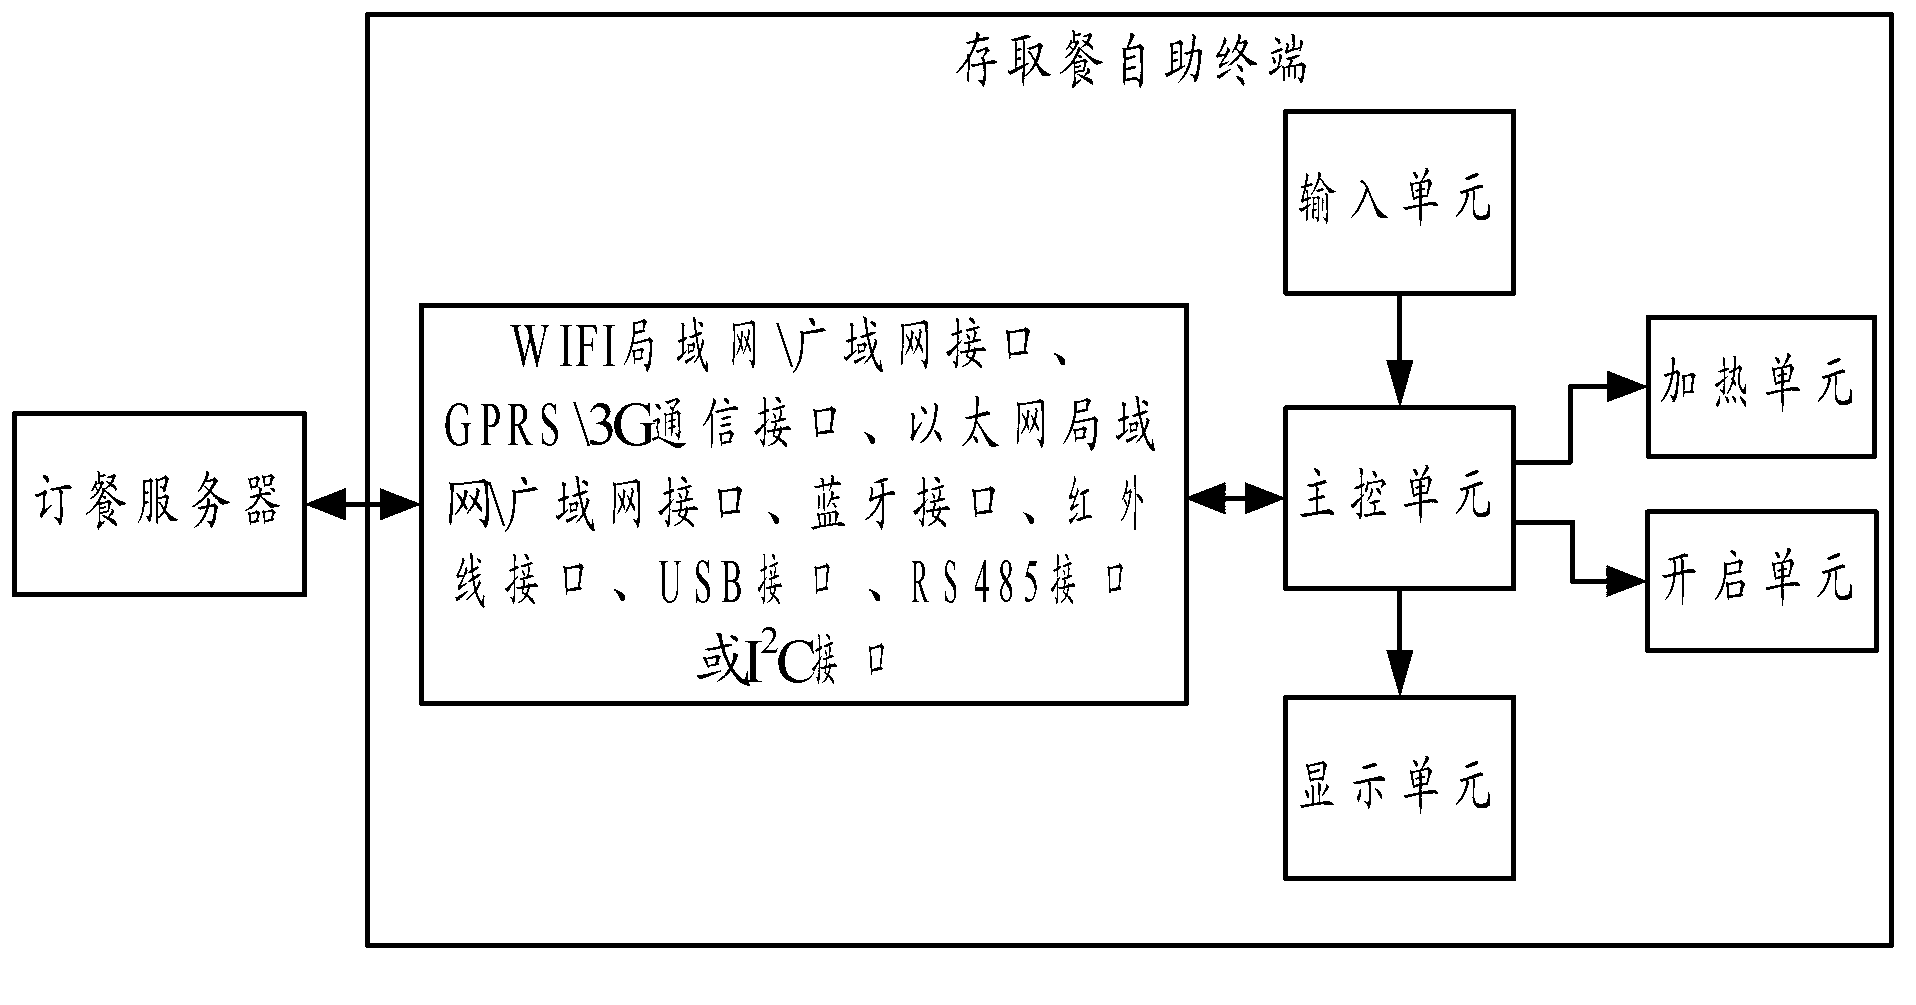 Self-help meal ordering and storing and taking system